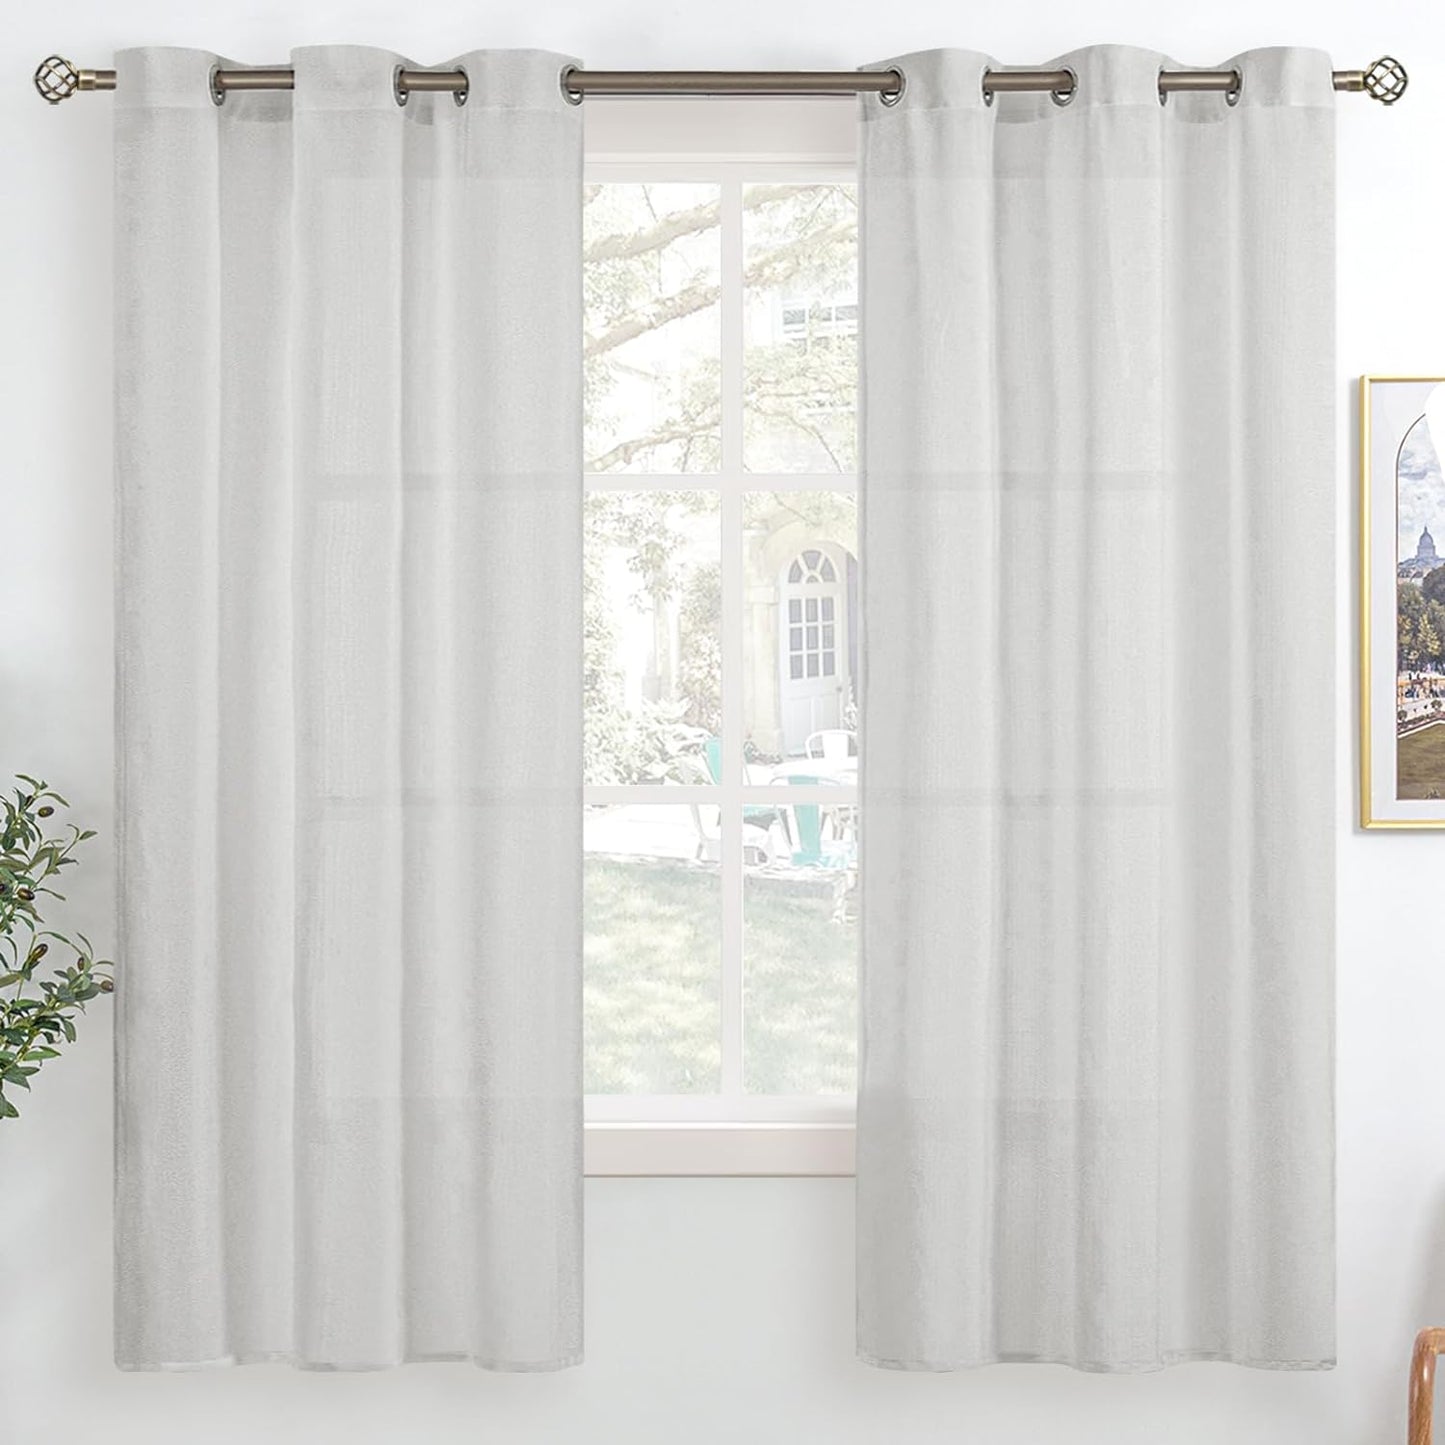 Bgment Natural Linen Look Semi Sheer Curtains for Bedroom, 52 X 54 Inch White Grommet Light Filtering Casual Textured Privacy Curtains for Bay Window, 2 Panels  BGment Light Grey 42W X 63L 